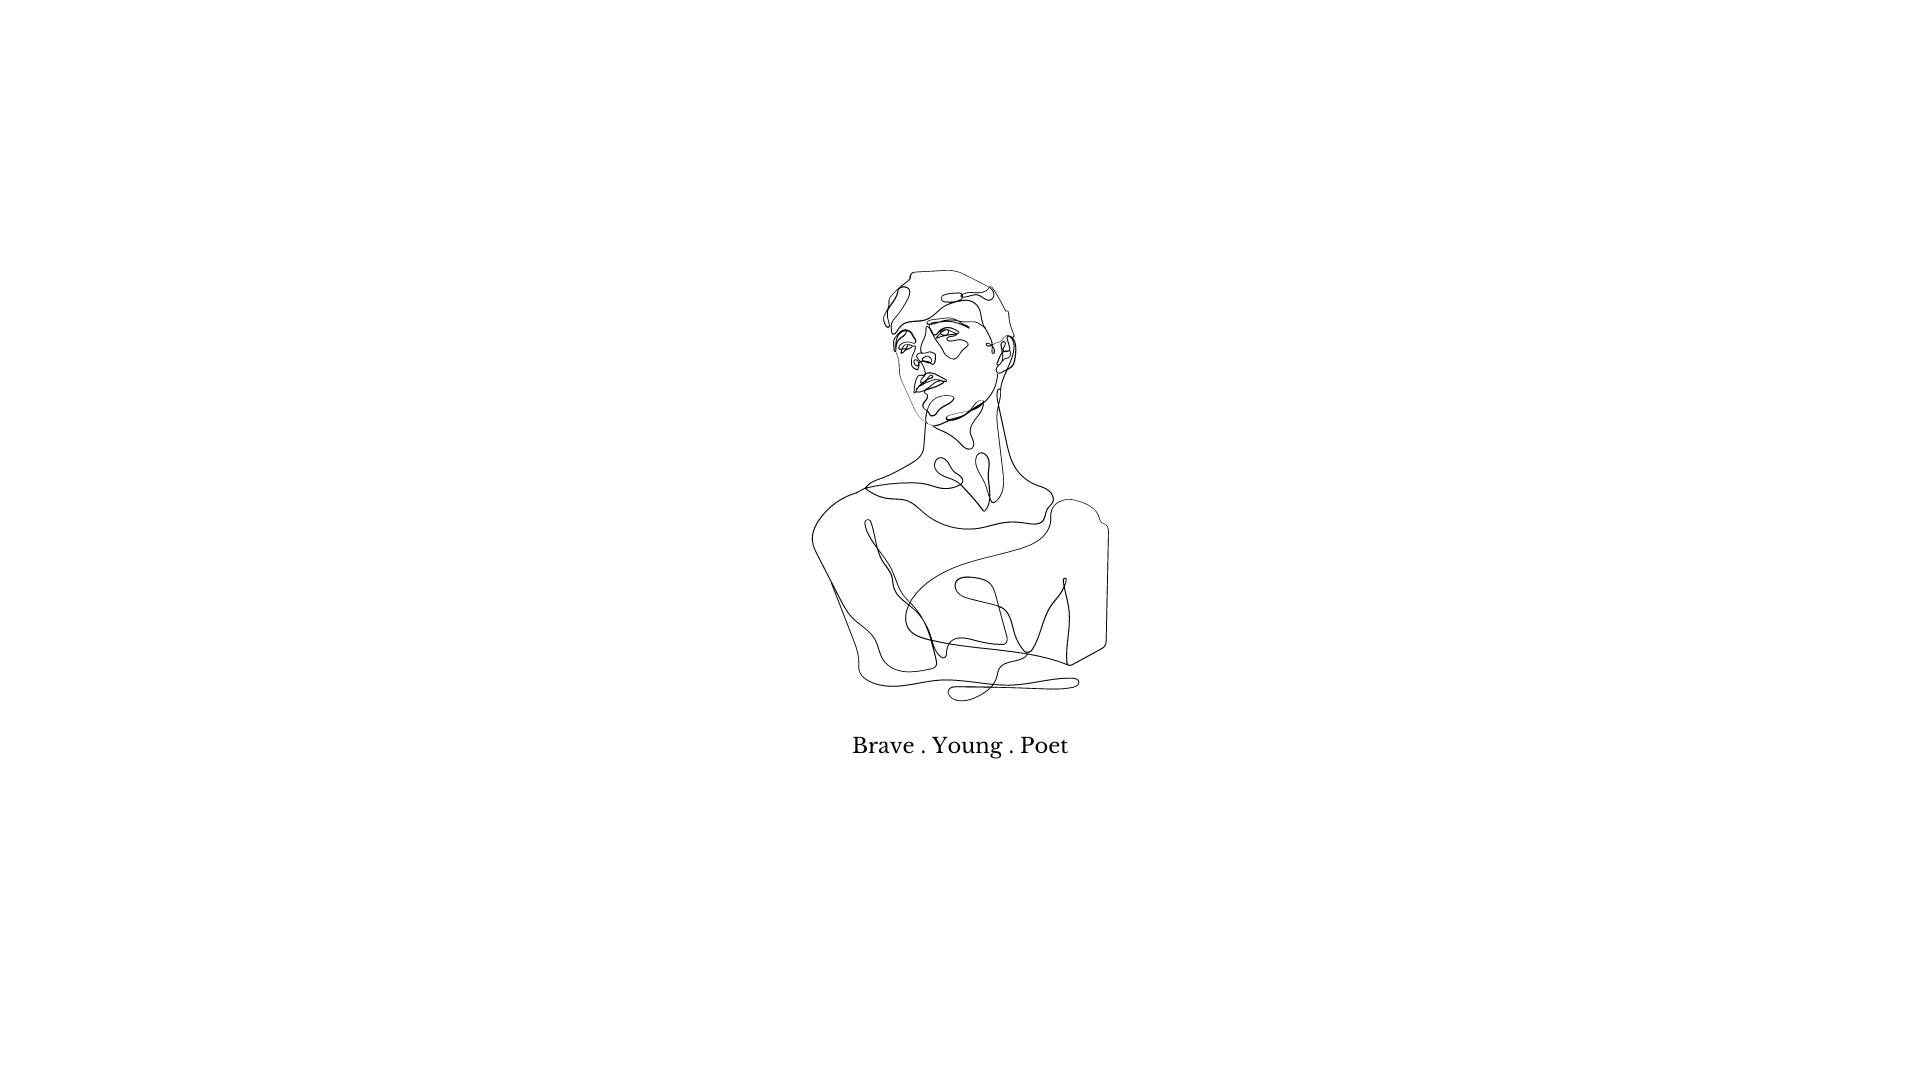 A drawing of the face and neck - Cute white